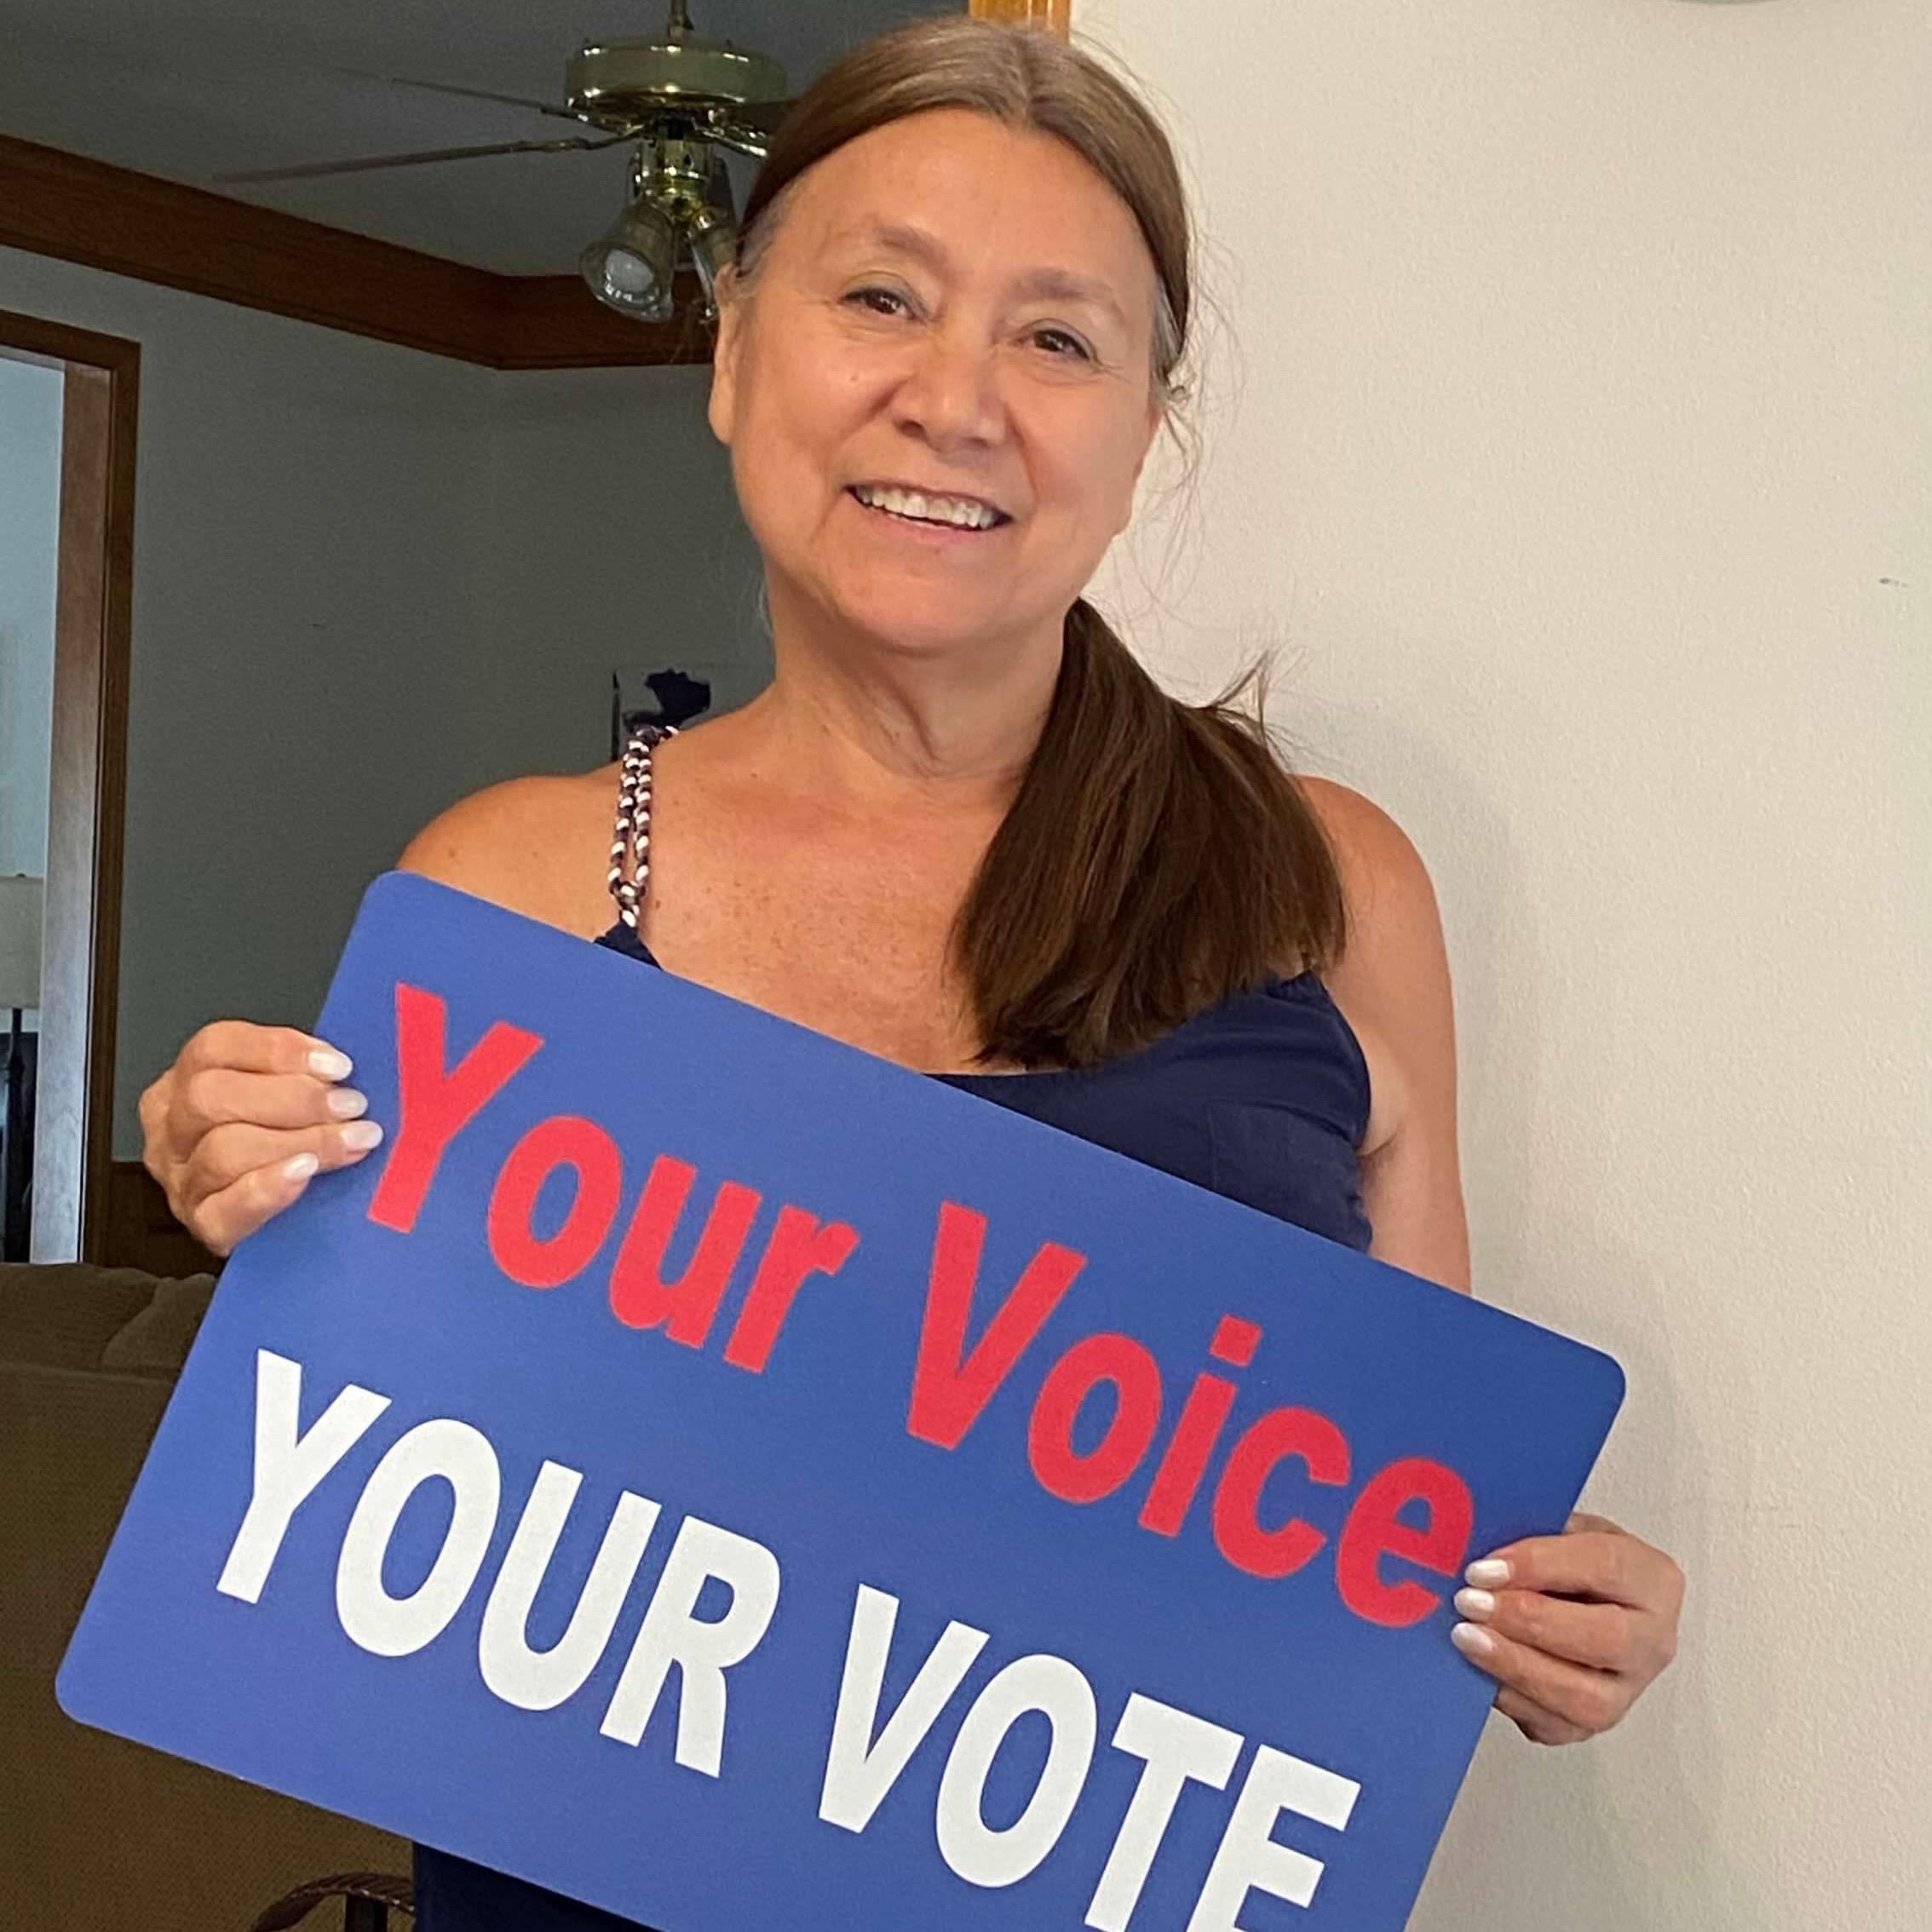 Woman with long dark ponytail holding a Your Voice Your Vote sign